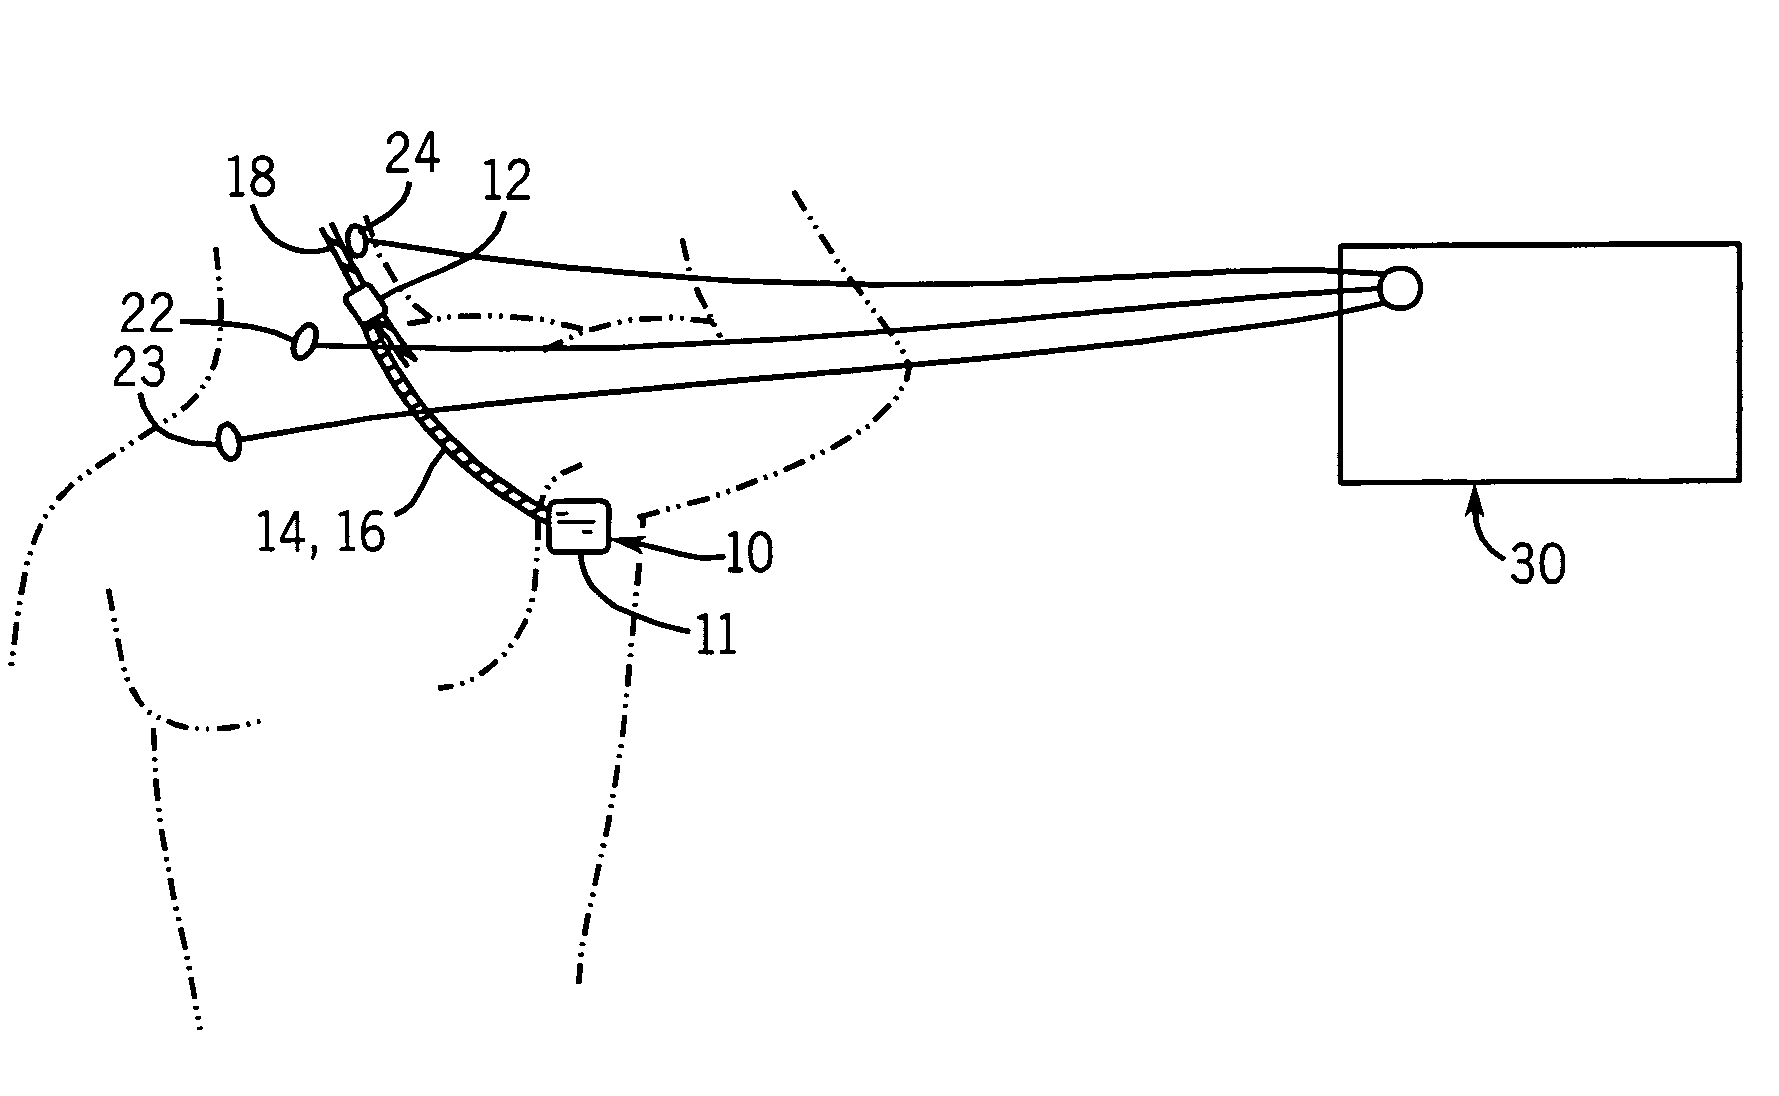 Method and apparatus for detecting vagus nerve stimulation